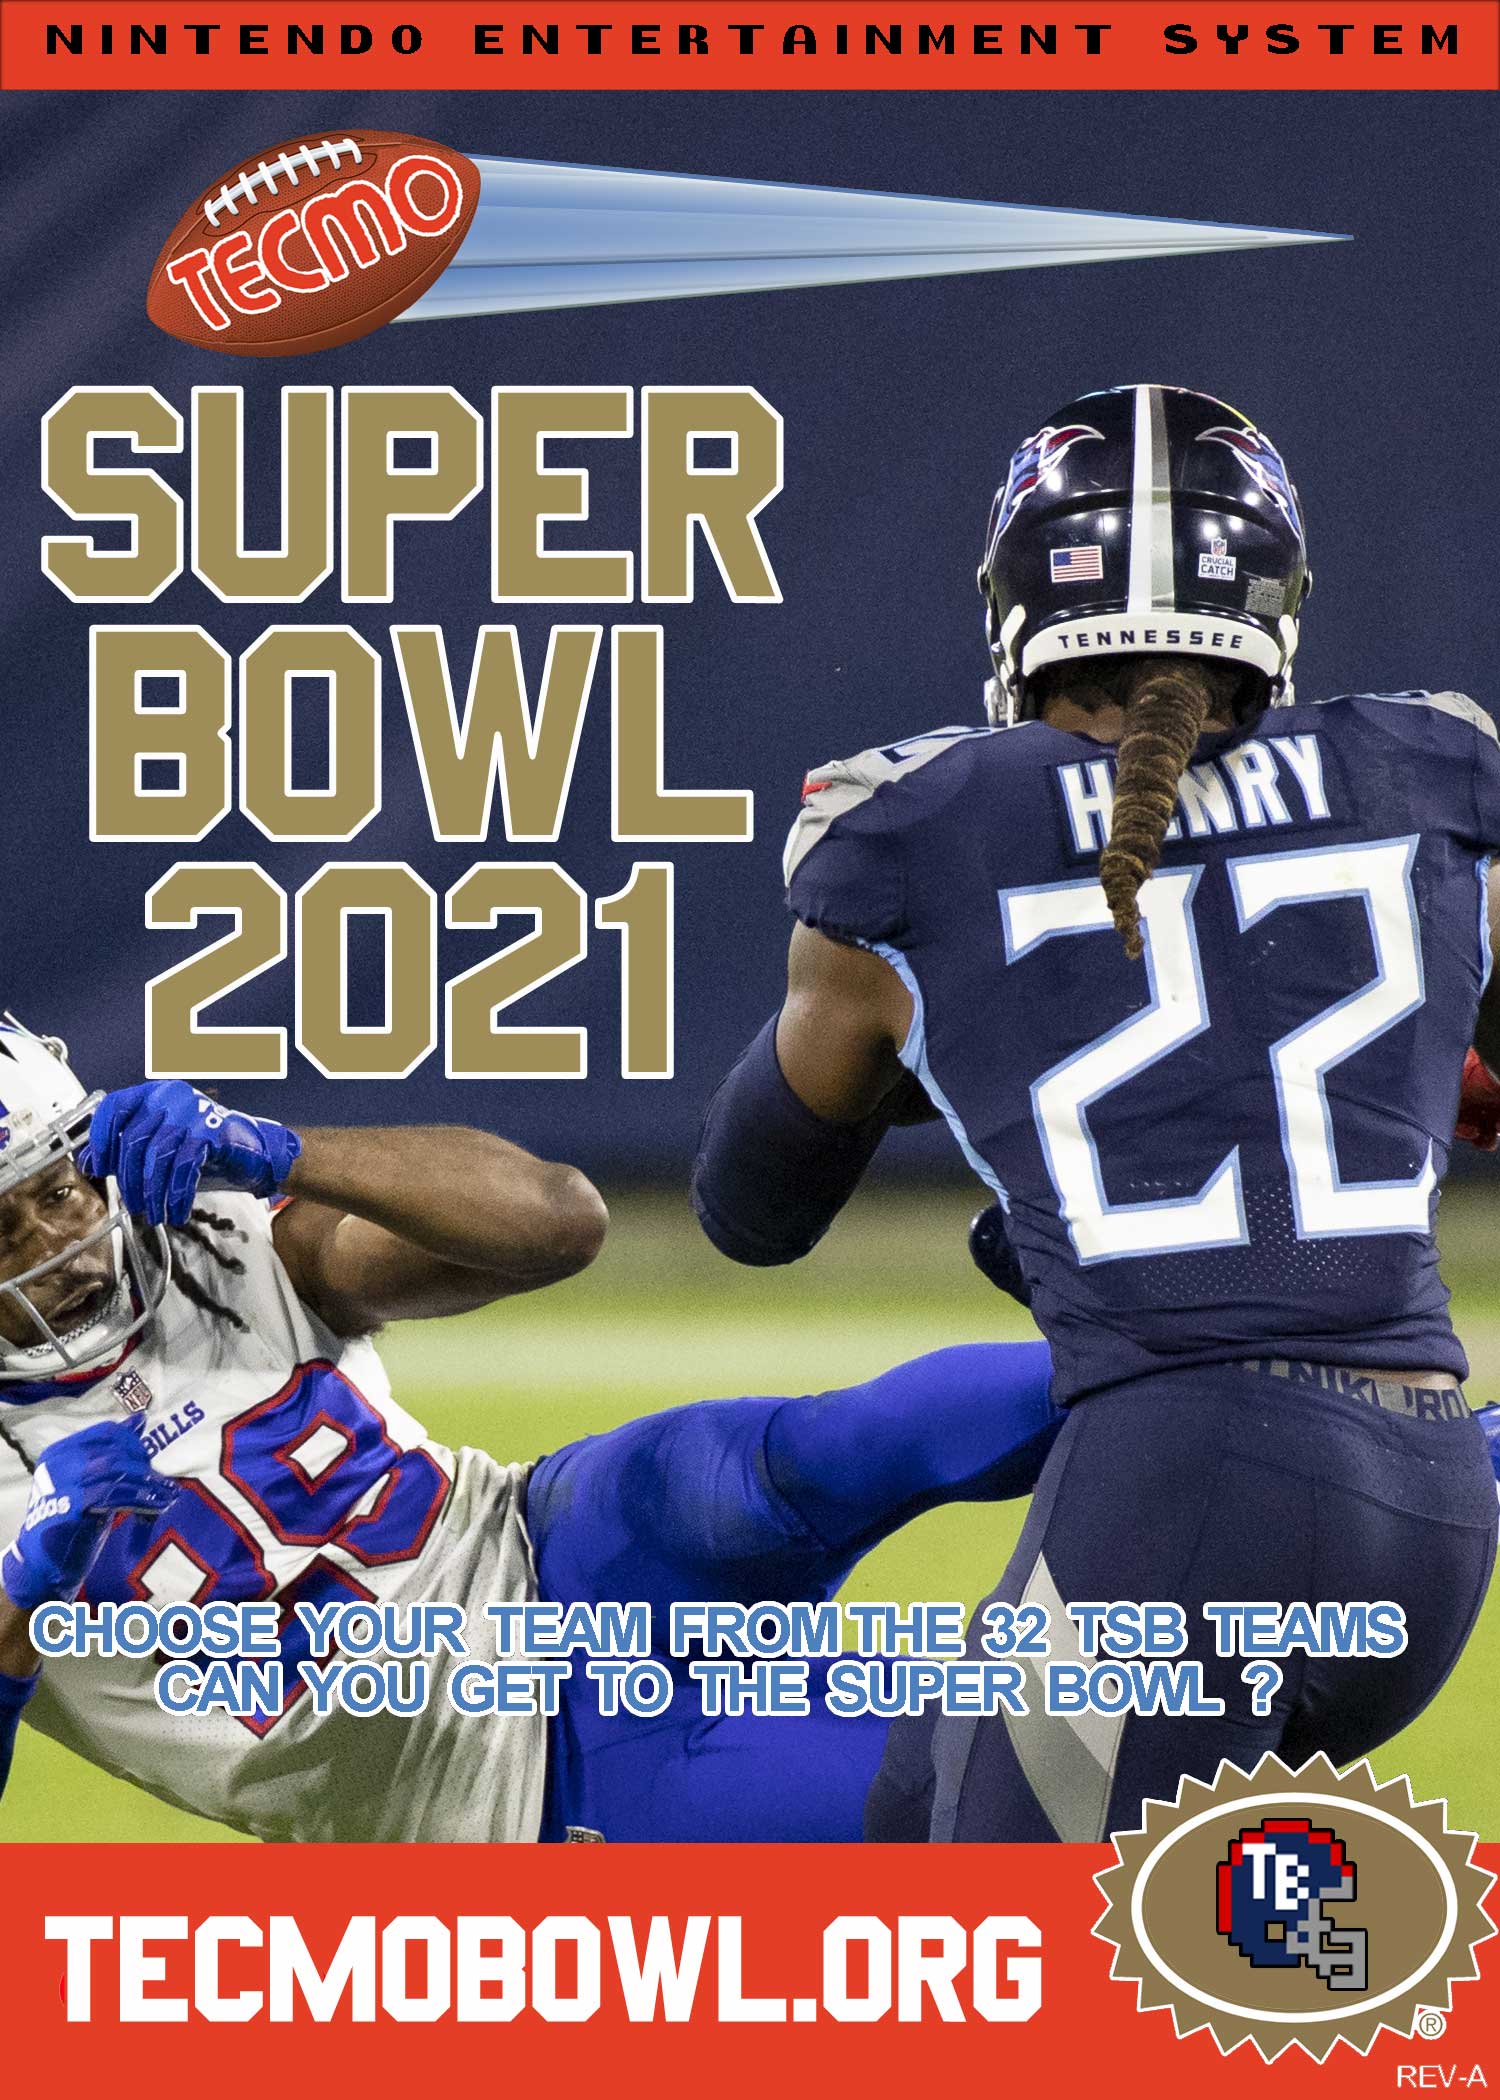 Tecmo Super Bowl 2021 Presented by TecmoBowl.org